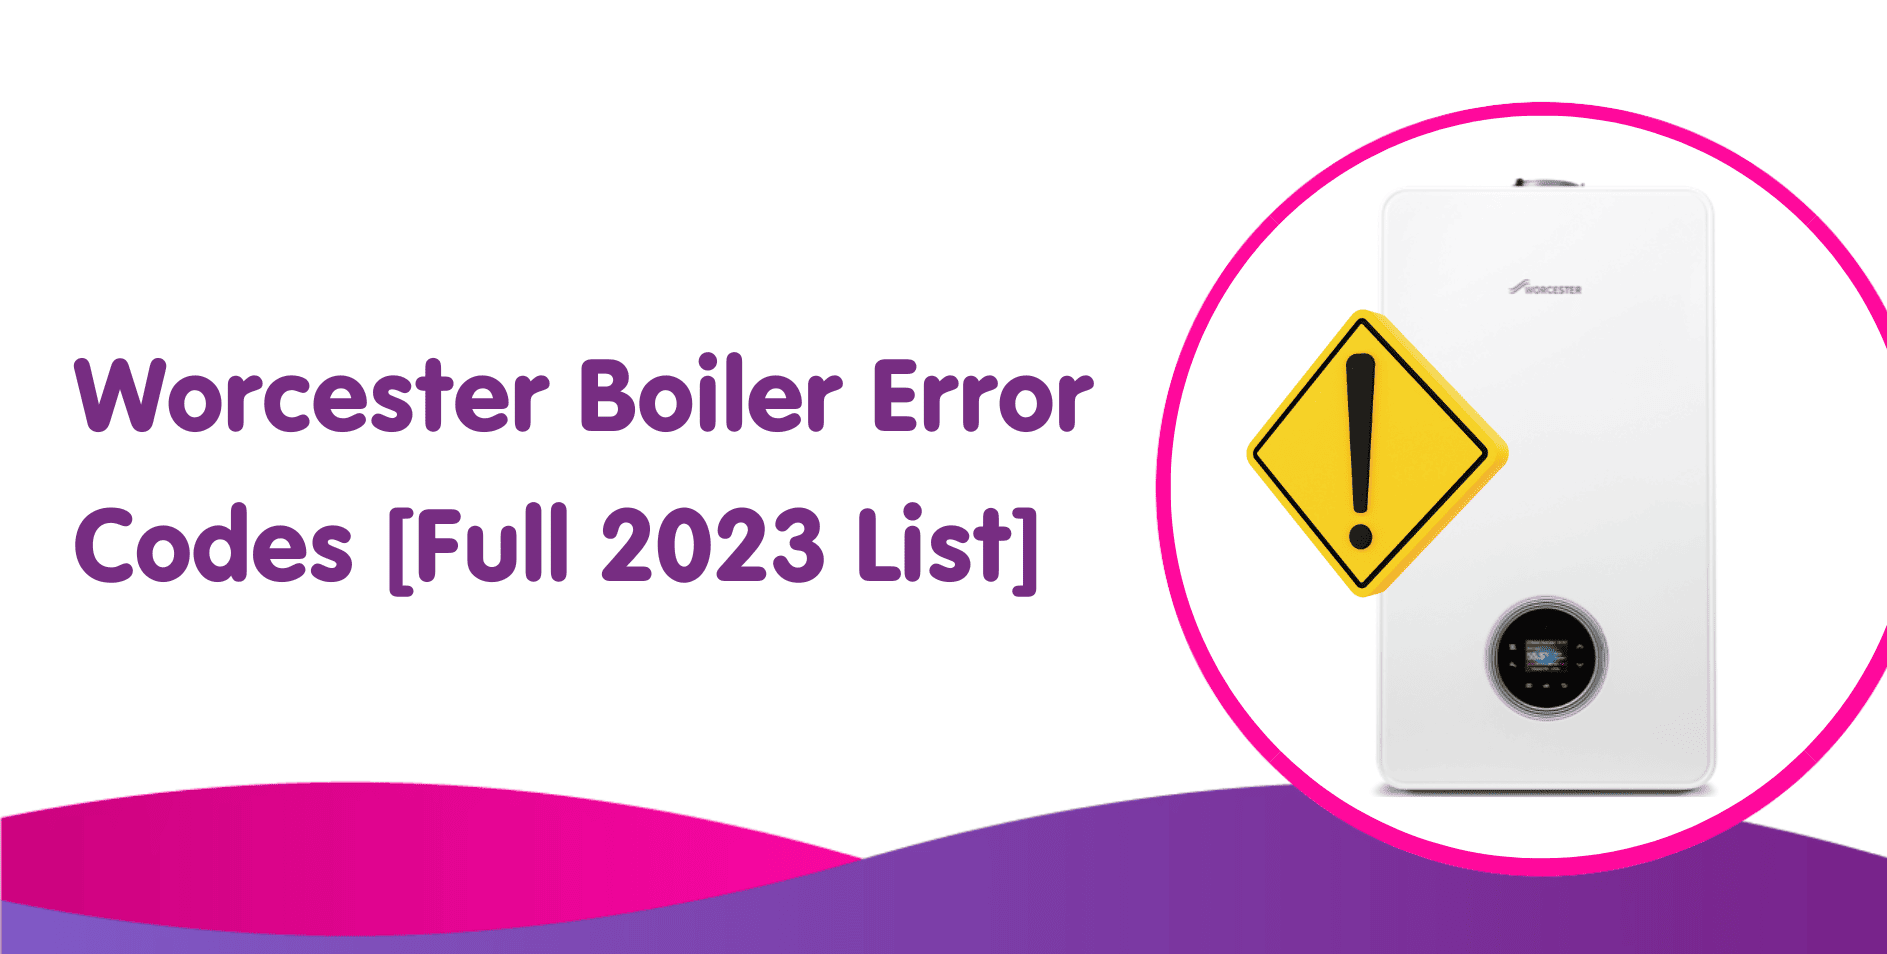 Worcester Boiler Error Codes, Fault Codes Meanings & Fixes